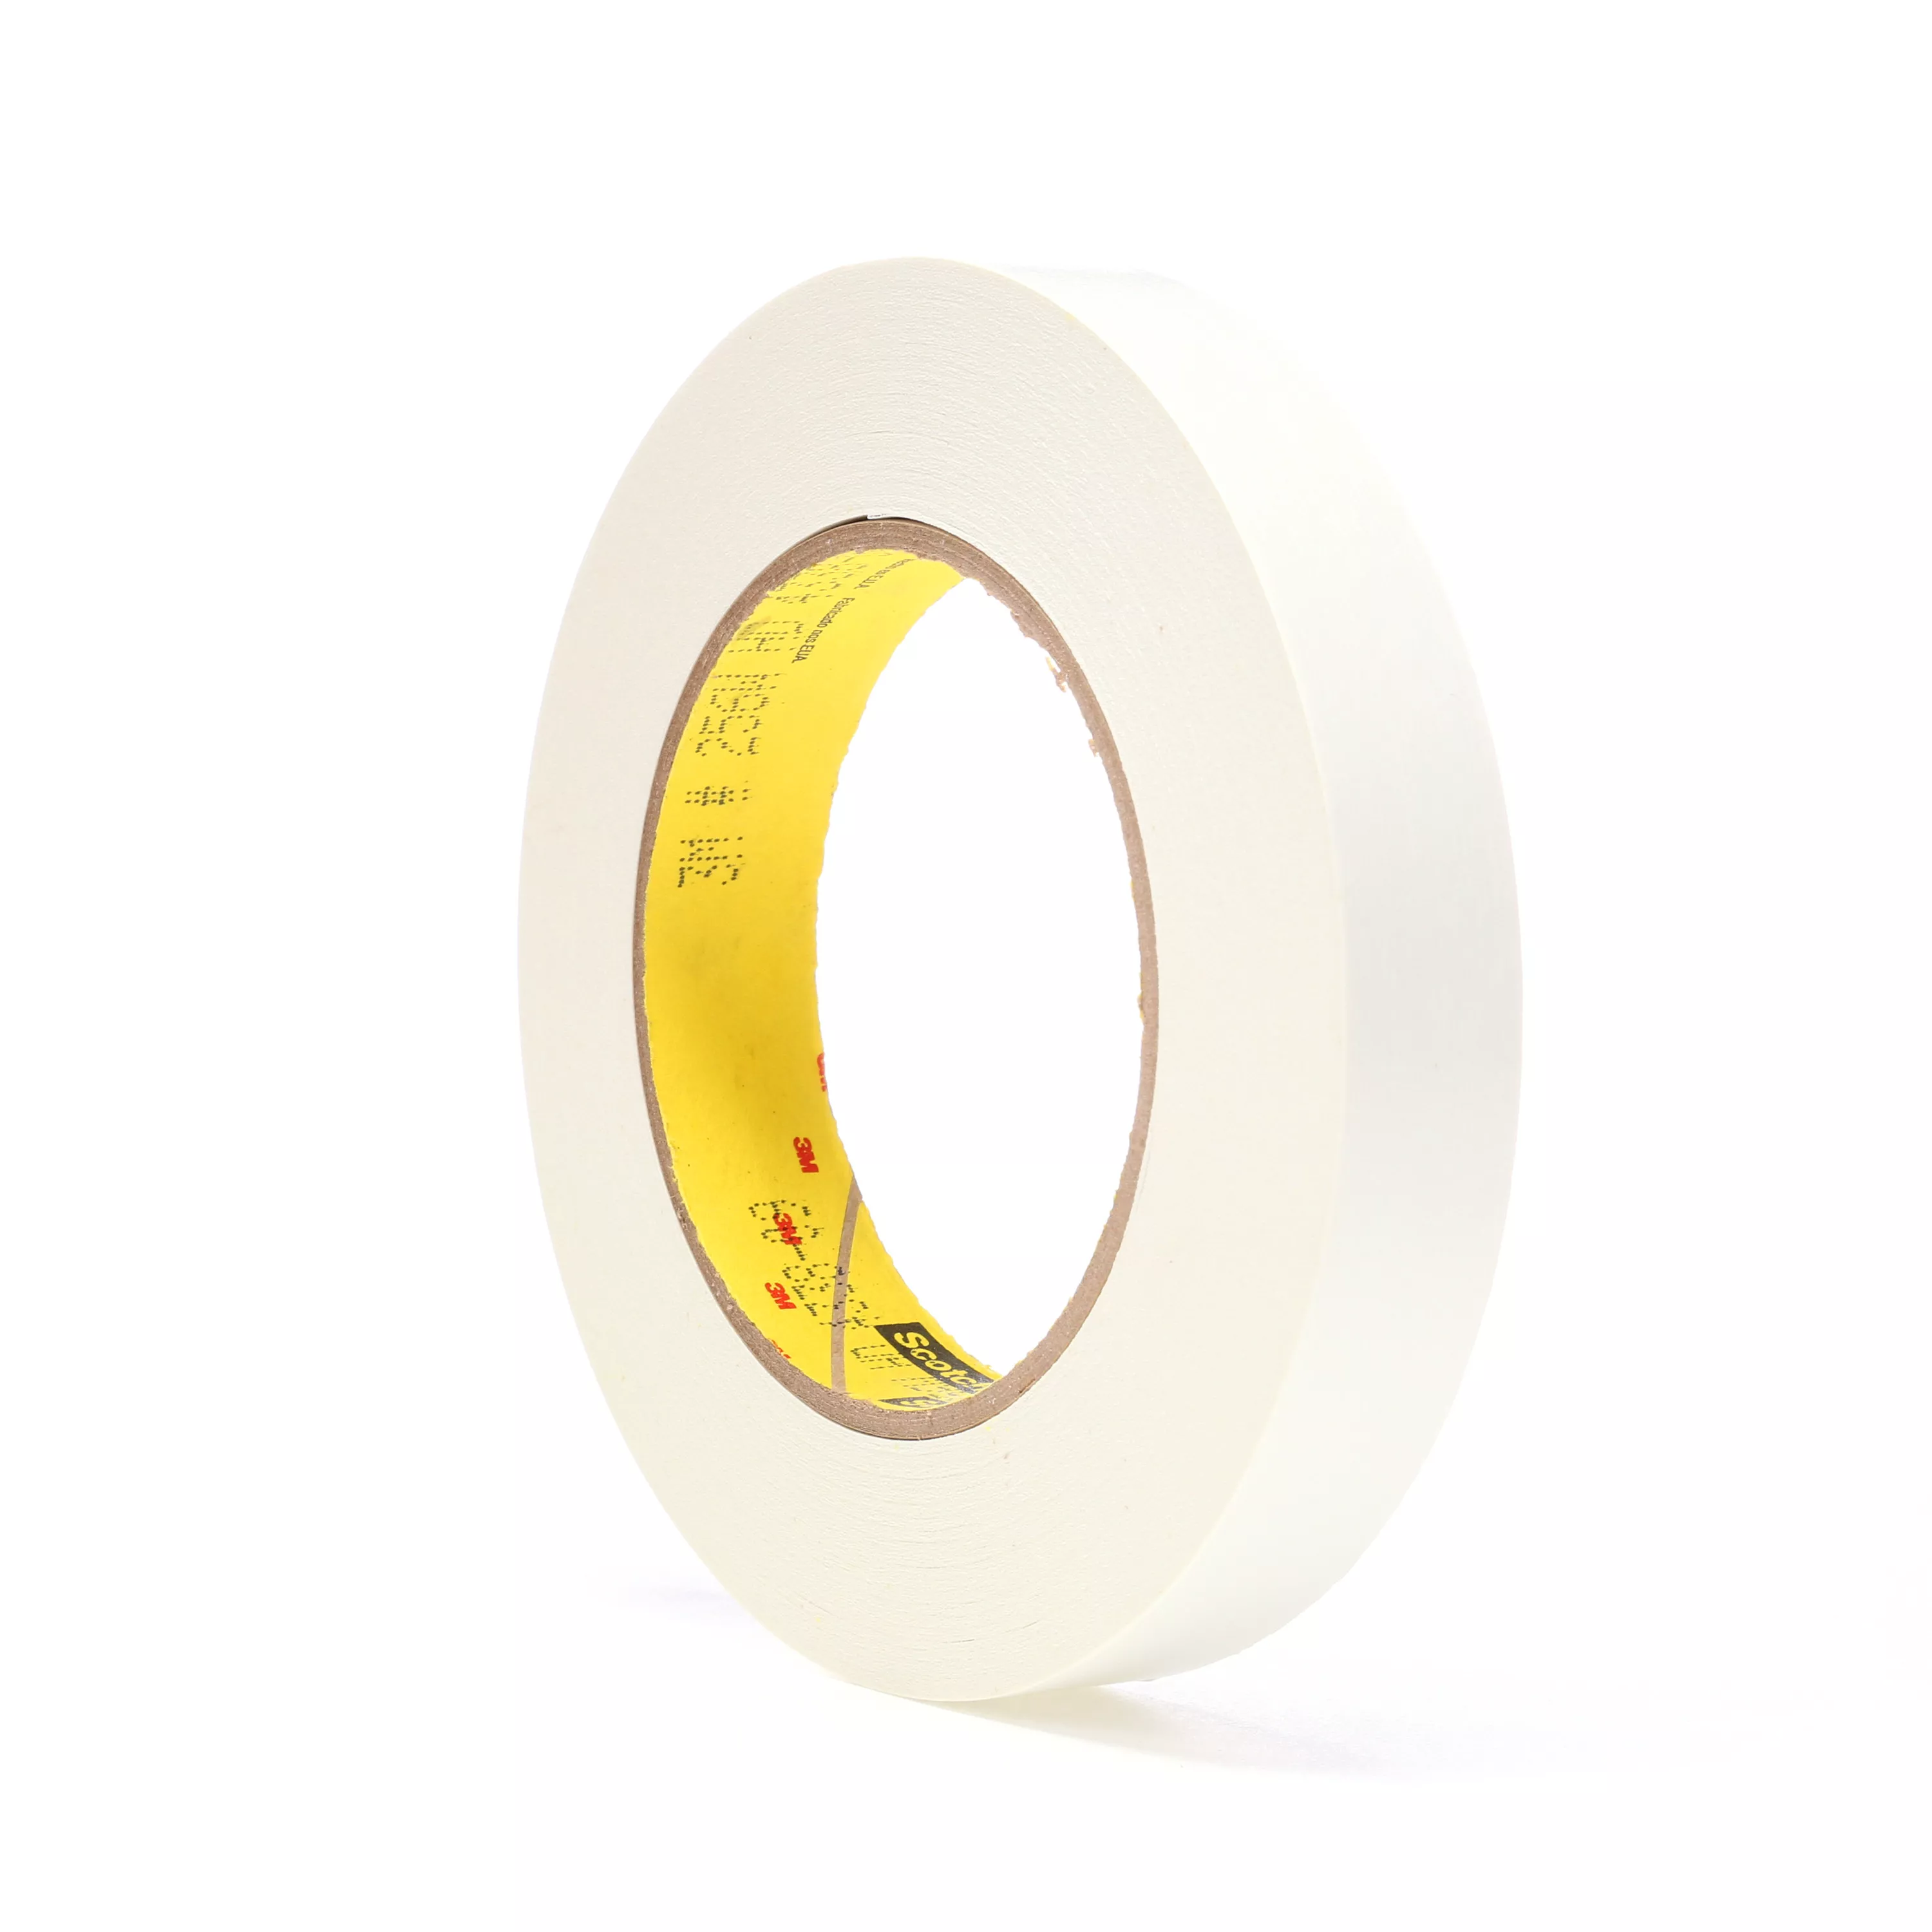 Product Number 256 | Scotch® Printable Flatback Paper Tape 256